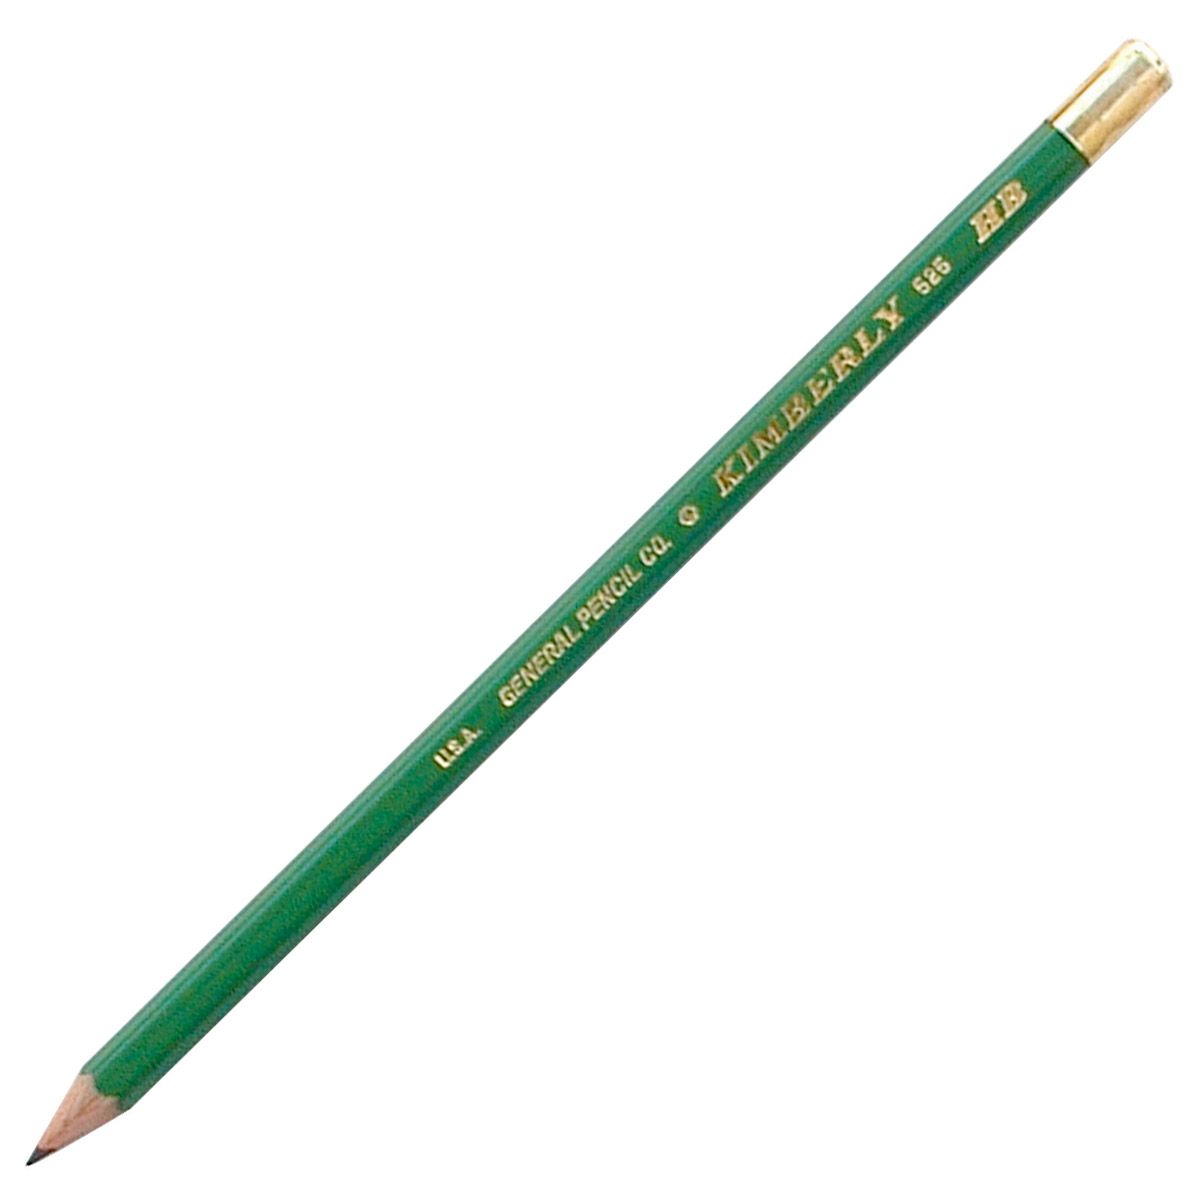 Kimberly Graphite Drawing Pencil - HB